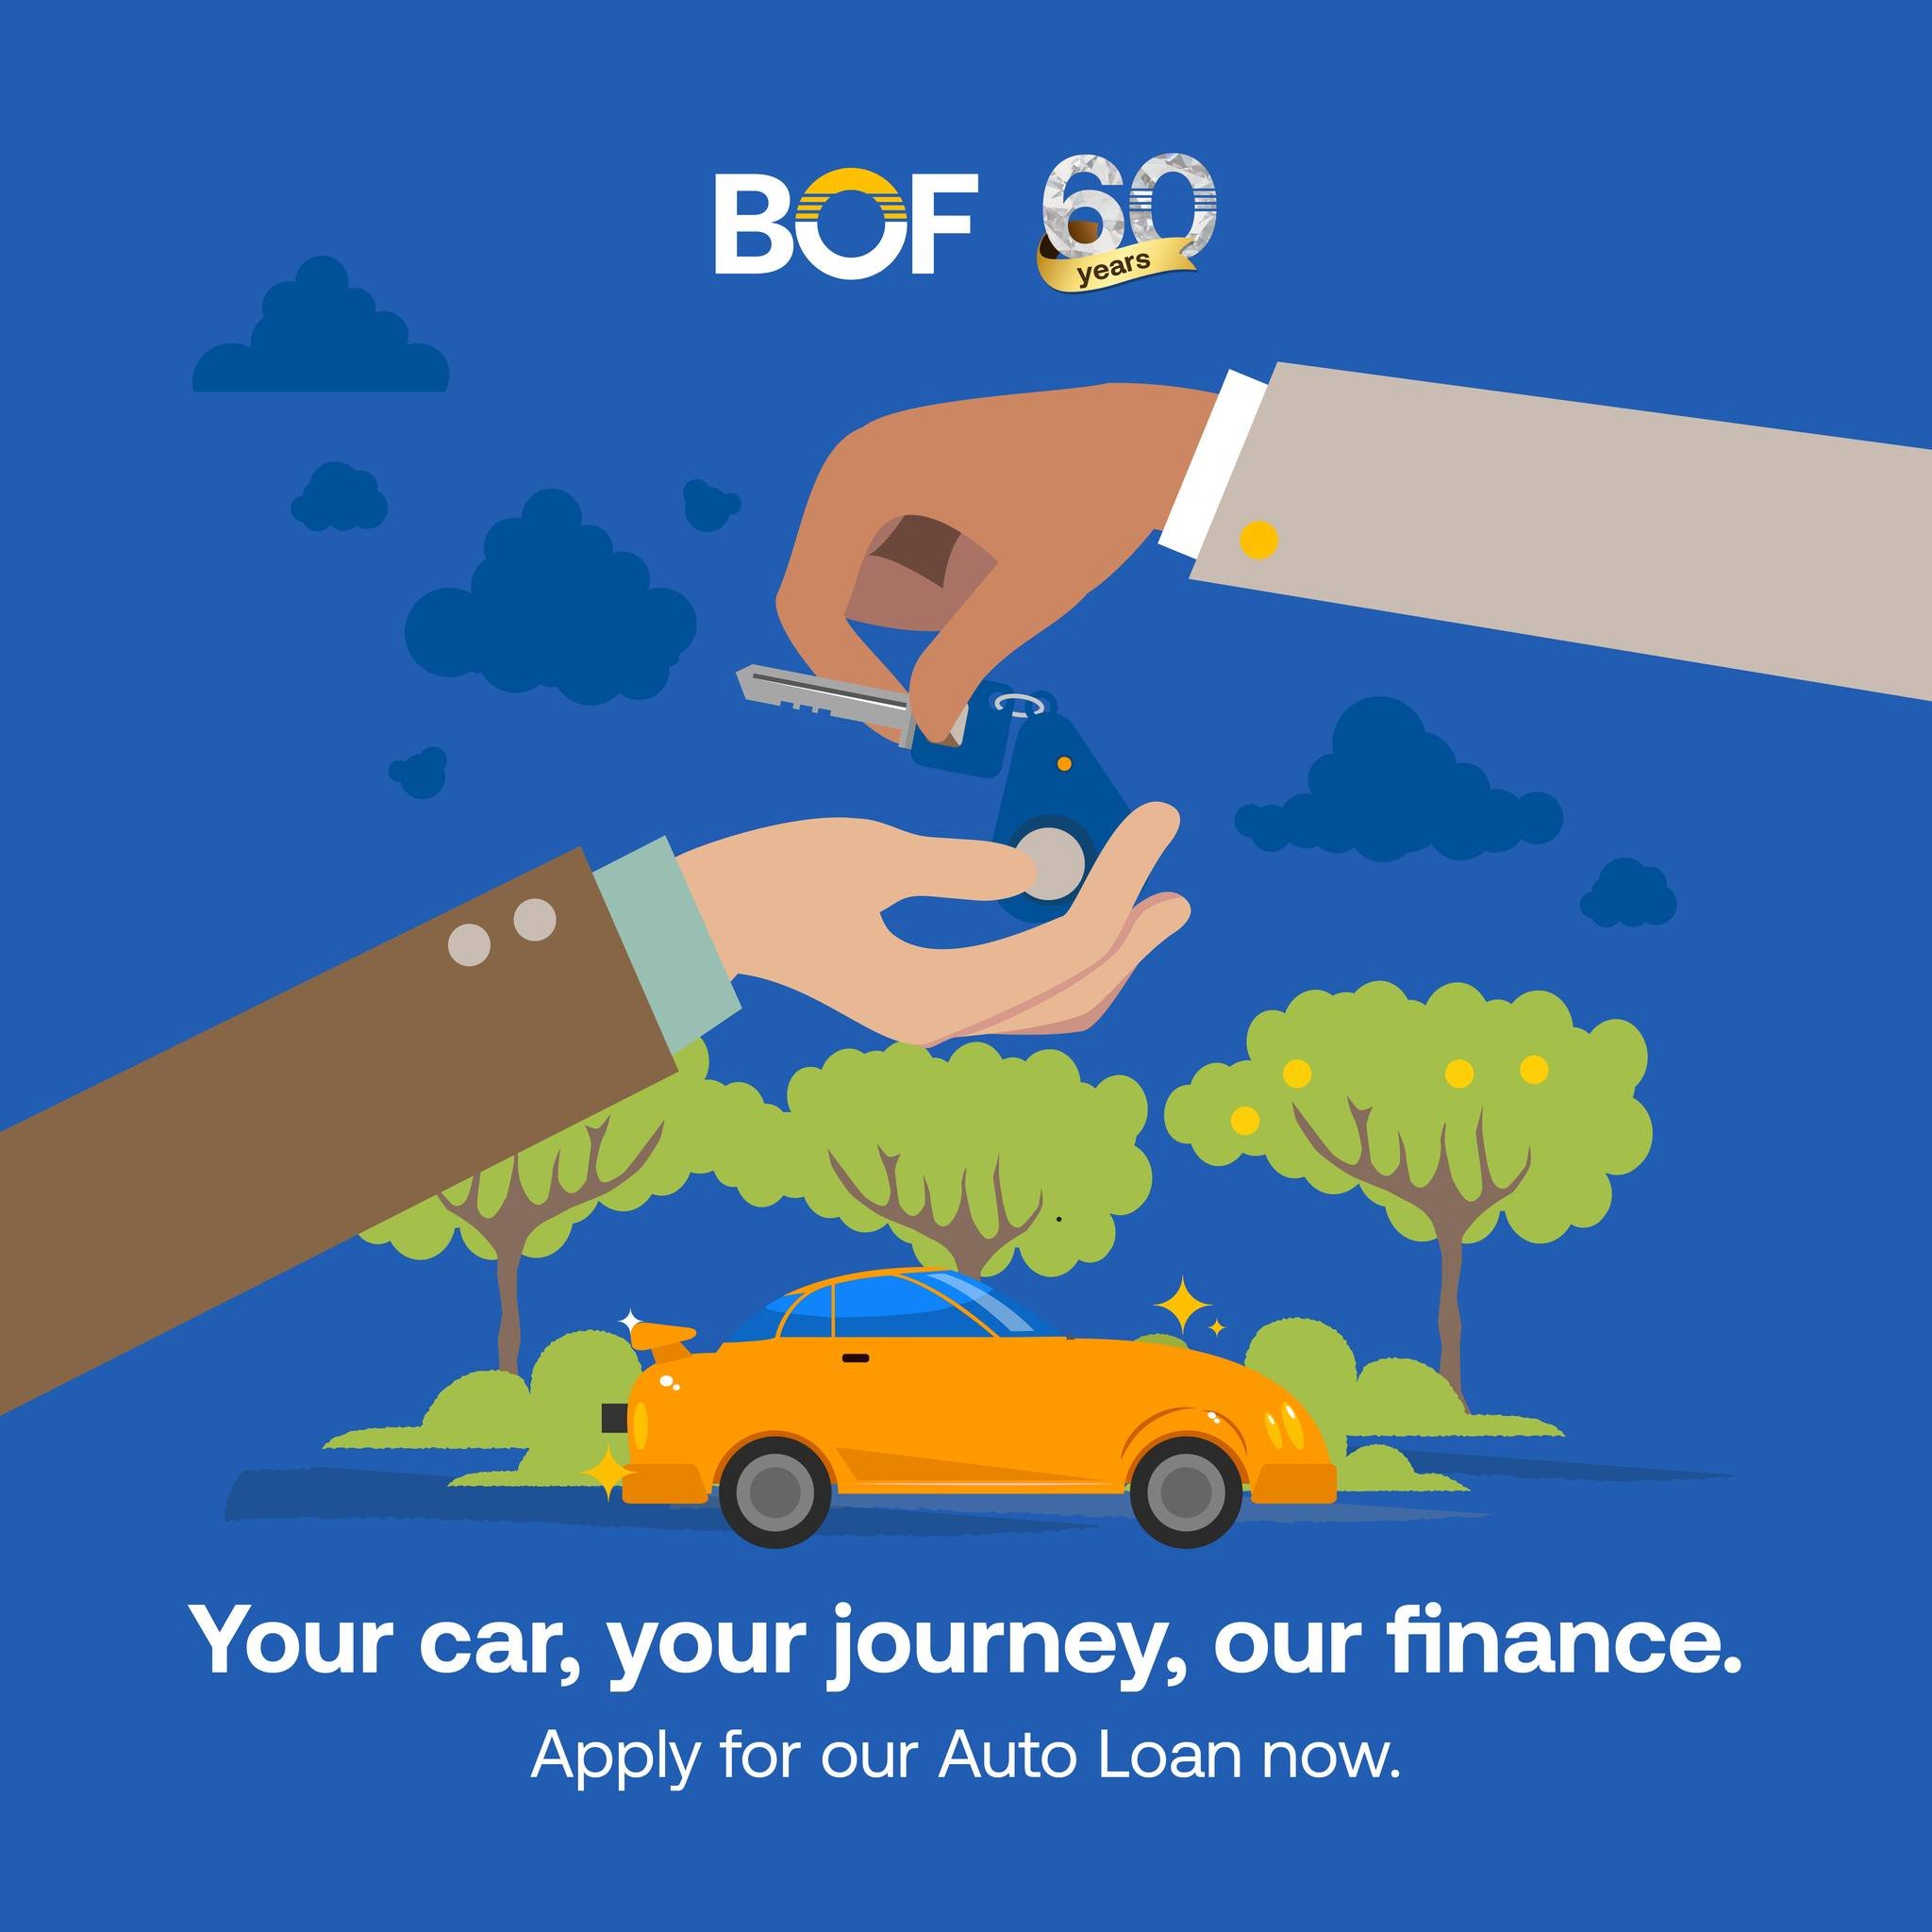 Drive and thrive with BOF's Auto Loan!
Ask us how!

https://www.bof.com.ph/loans

BOF, Inc. (A Rural Bank) is regulated by the Bangko Sentral ng Pilipinas (www.bsp.gov.ph) and deposits are insured by PDIC up to P500,000 per depositor.